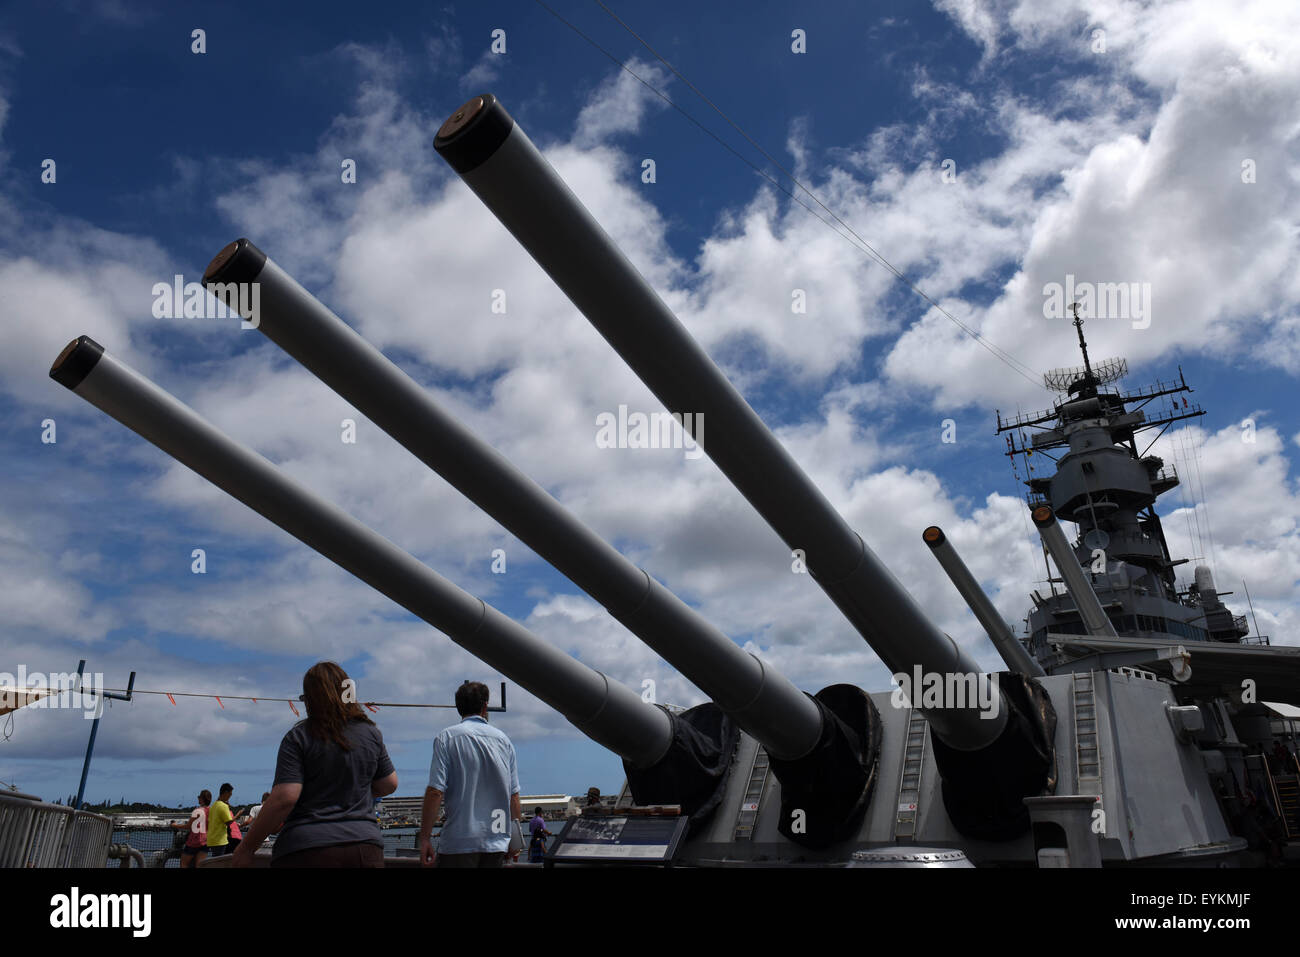 Hawaii, USA. 30th July, 2015. Tourists view USS Missouri (BB-63) in Honolulu, Hawaii, the United States, July 30, 2015. USS Missouri (BB-63) was the site where Japan signed the surrender documents at the end of the World War II. In 1998, this battleship was donated to the USS Missouri Memorial Association and became a museum ship at Pearl Harbor, Hawaii. © Yin Bogu/Xinhua/Alamy Live News Stock Photo